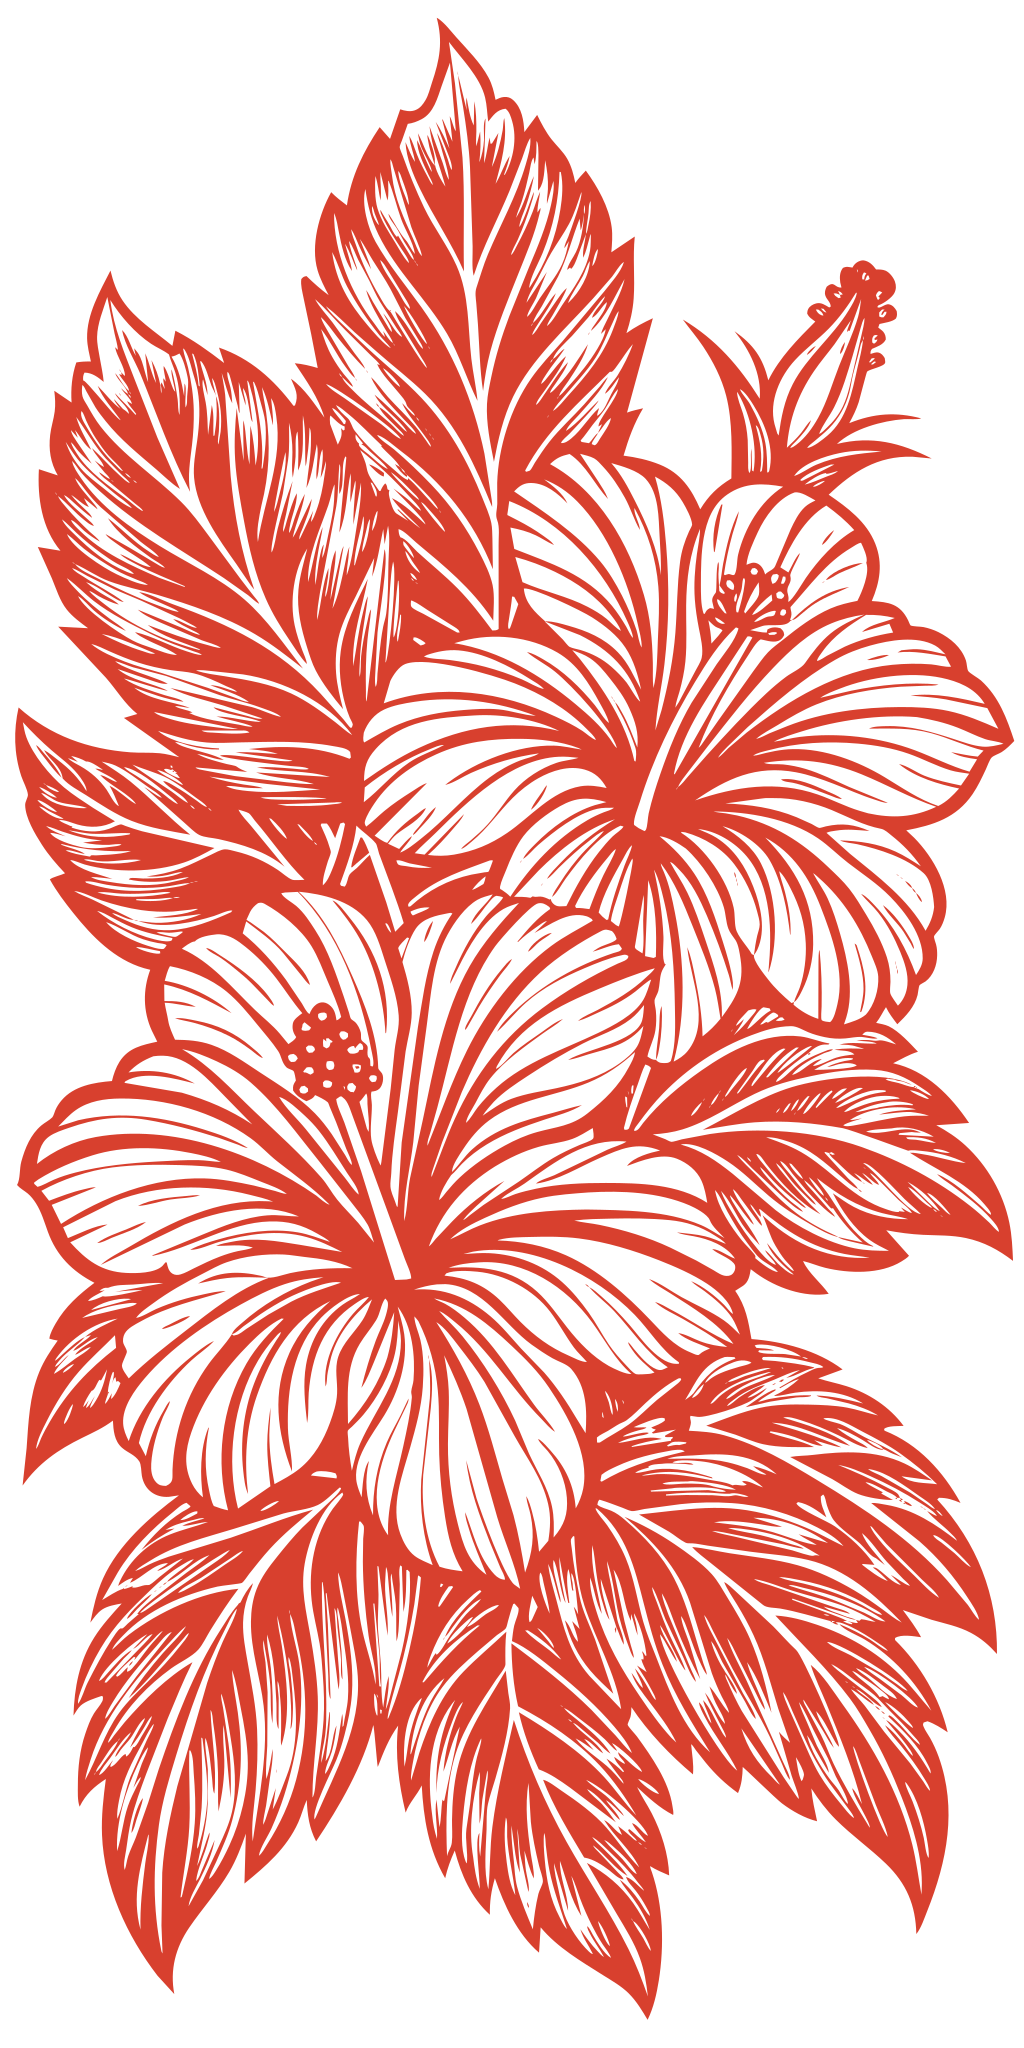 draw detail line art. hibiscus flowers com folhas background, draw detail for coloring page. intrinsic black lines with white background